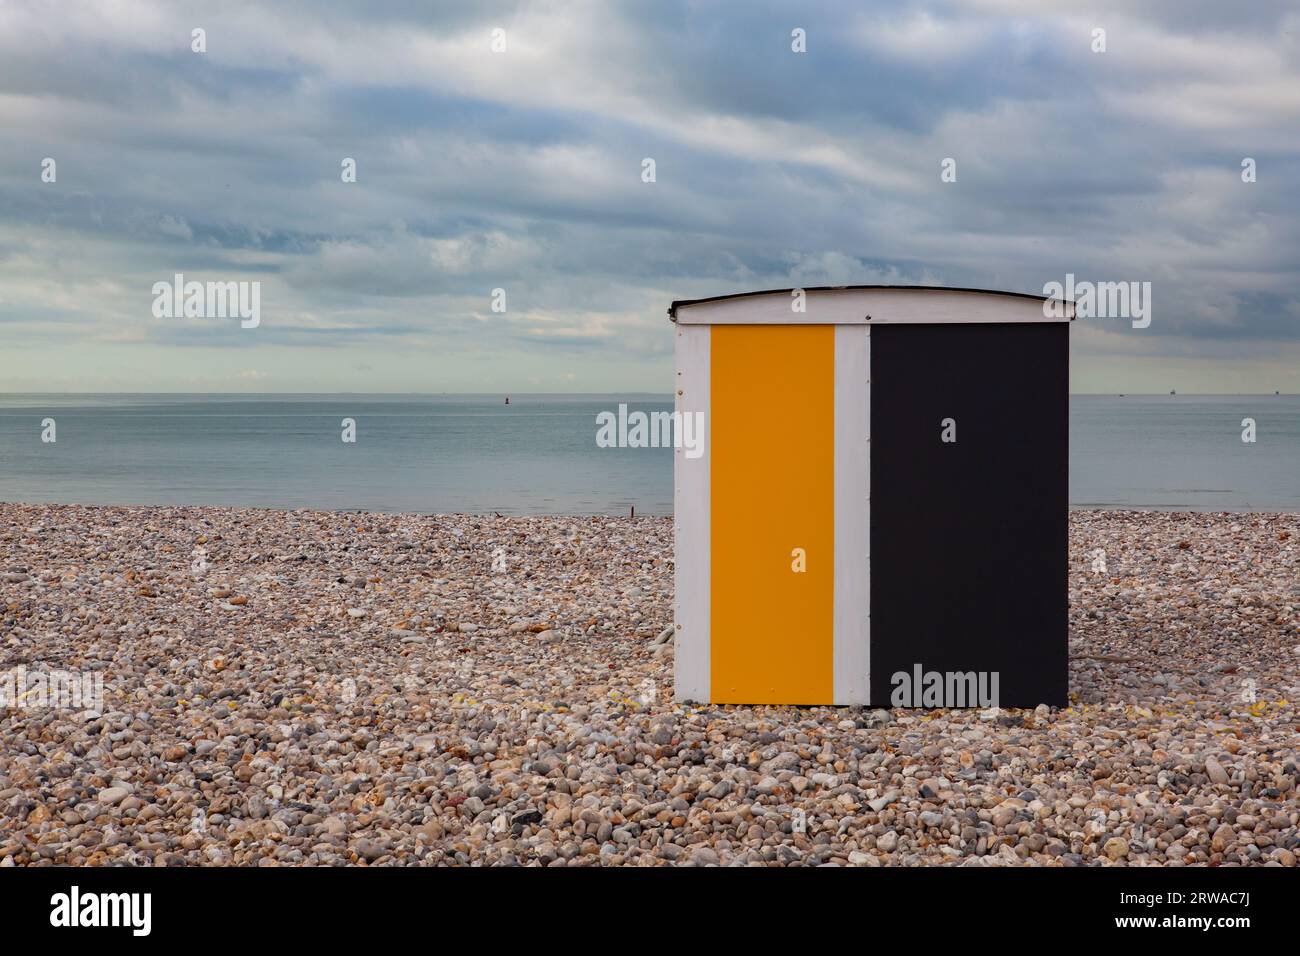 End of season on the beach, Le Havre, France. Small houses or beach cabins of different colors on the beach of Le Havre in France Stock Photo